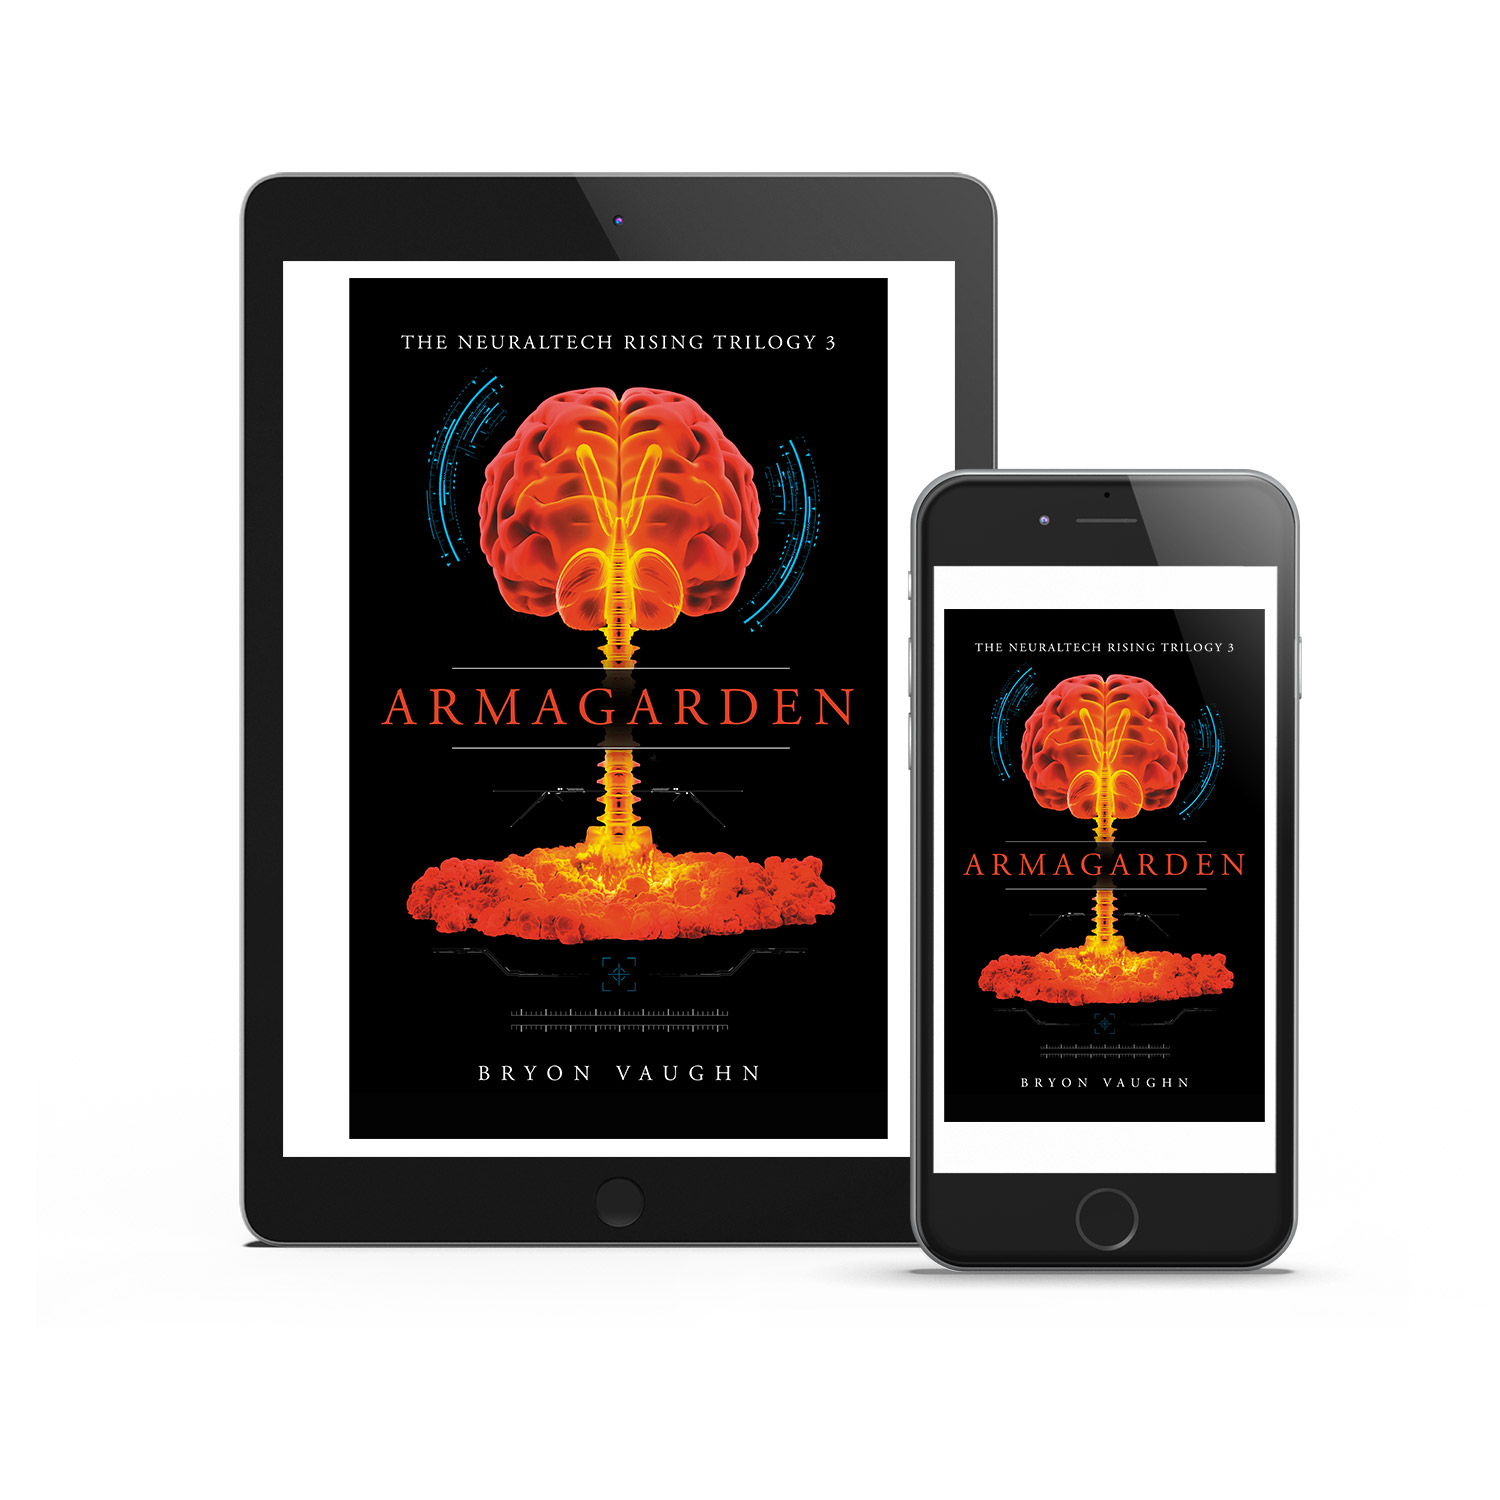 'Armagarden' is a classy cyber thriller by author Bryon Vaughn. The book cover design is by Mark Thomas. To learn more about what Mark could do for your book, please visit coverness.com.